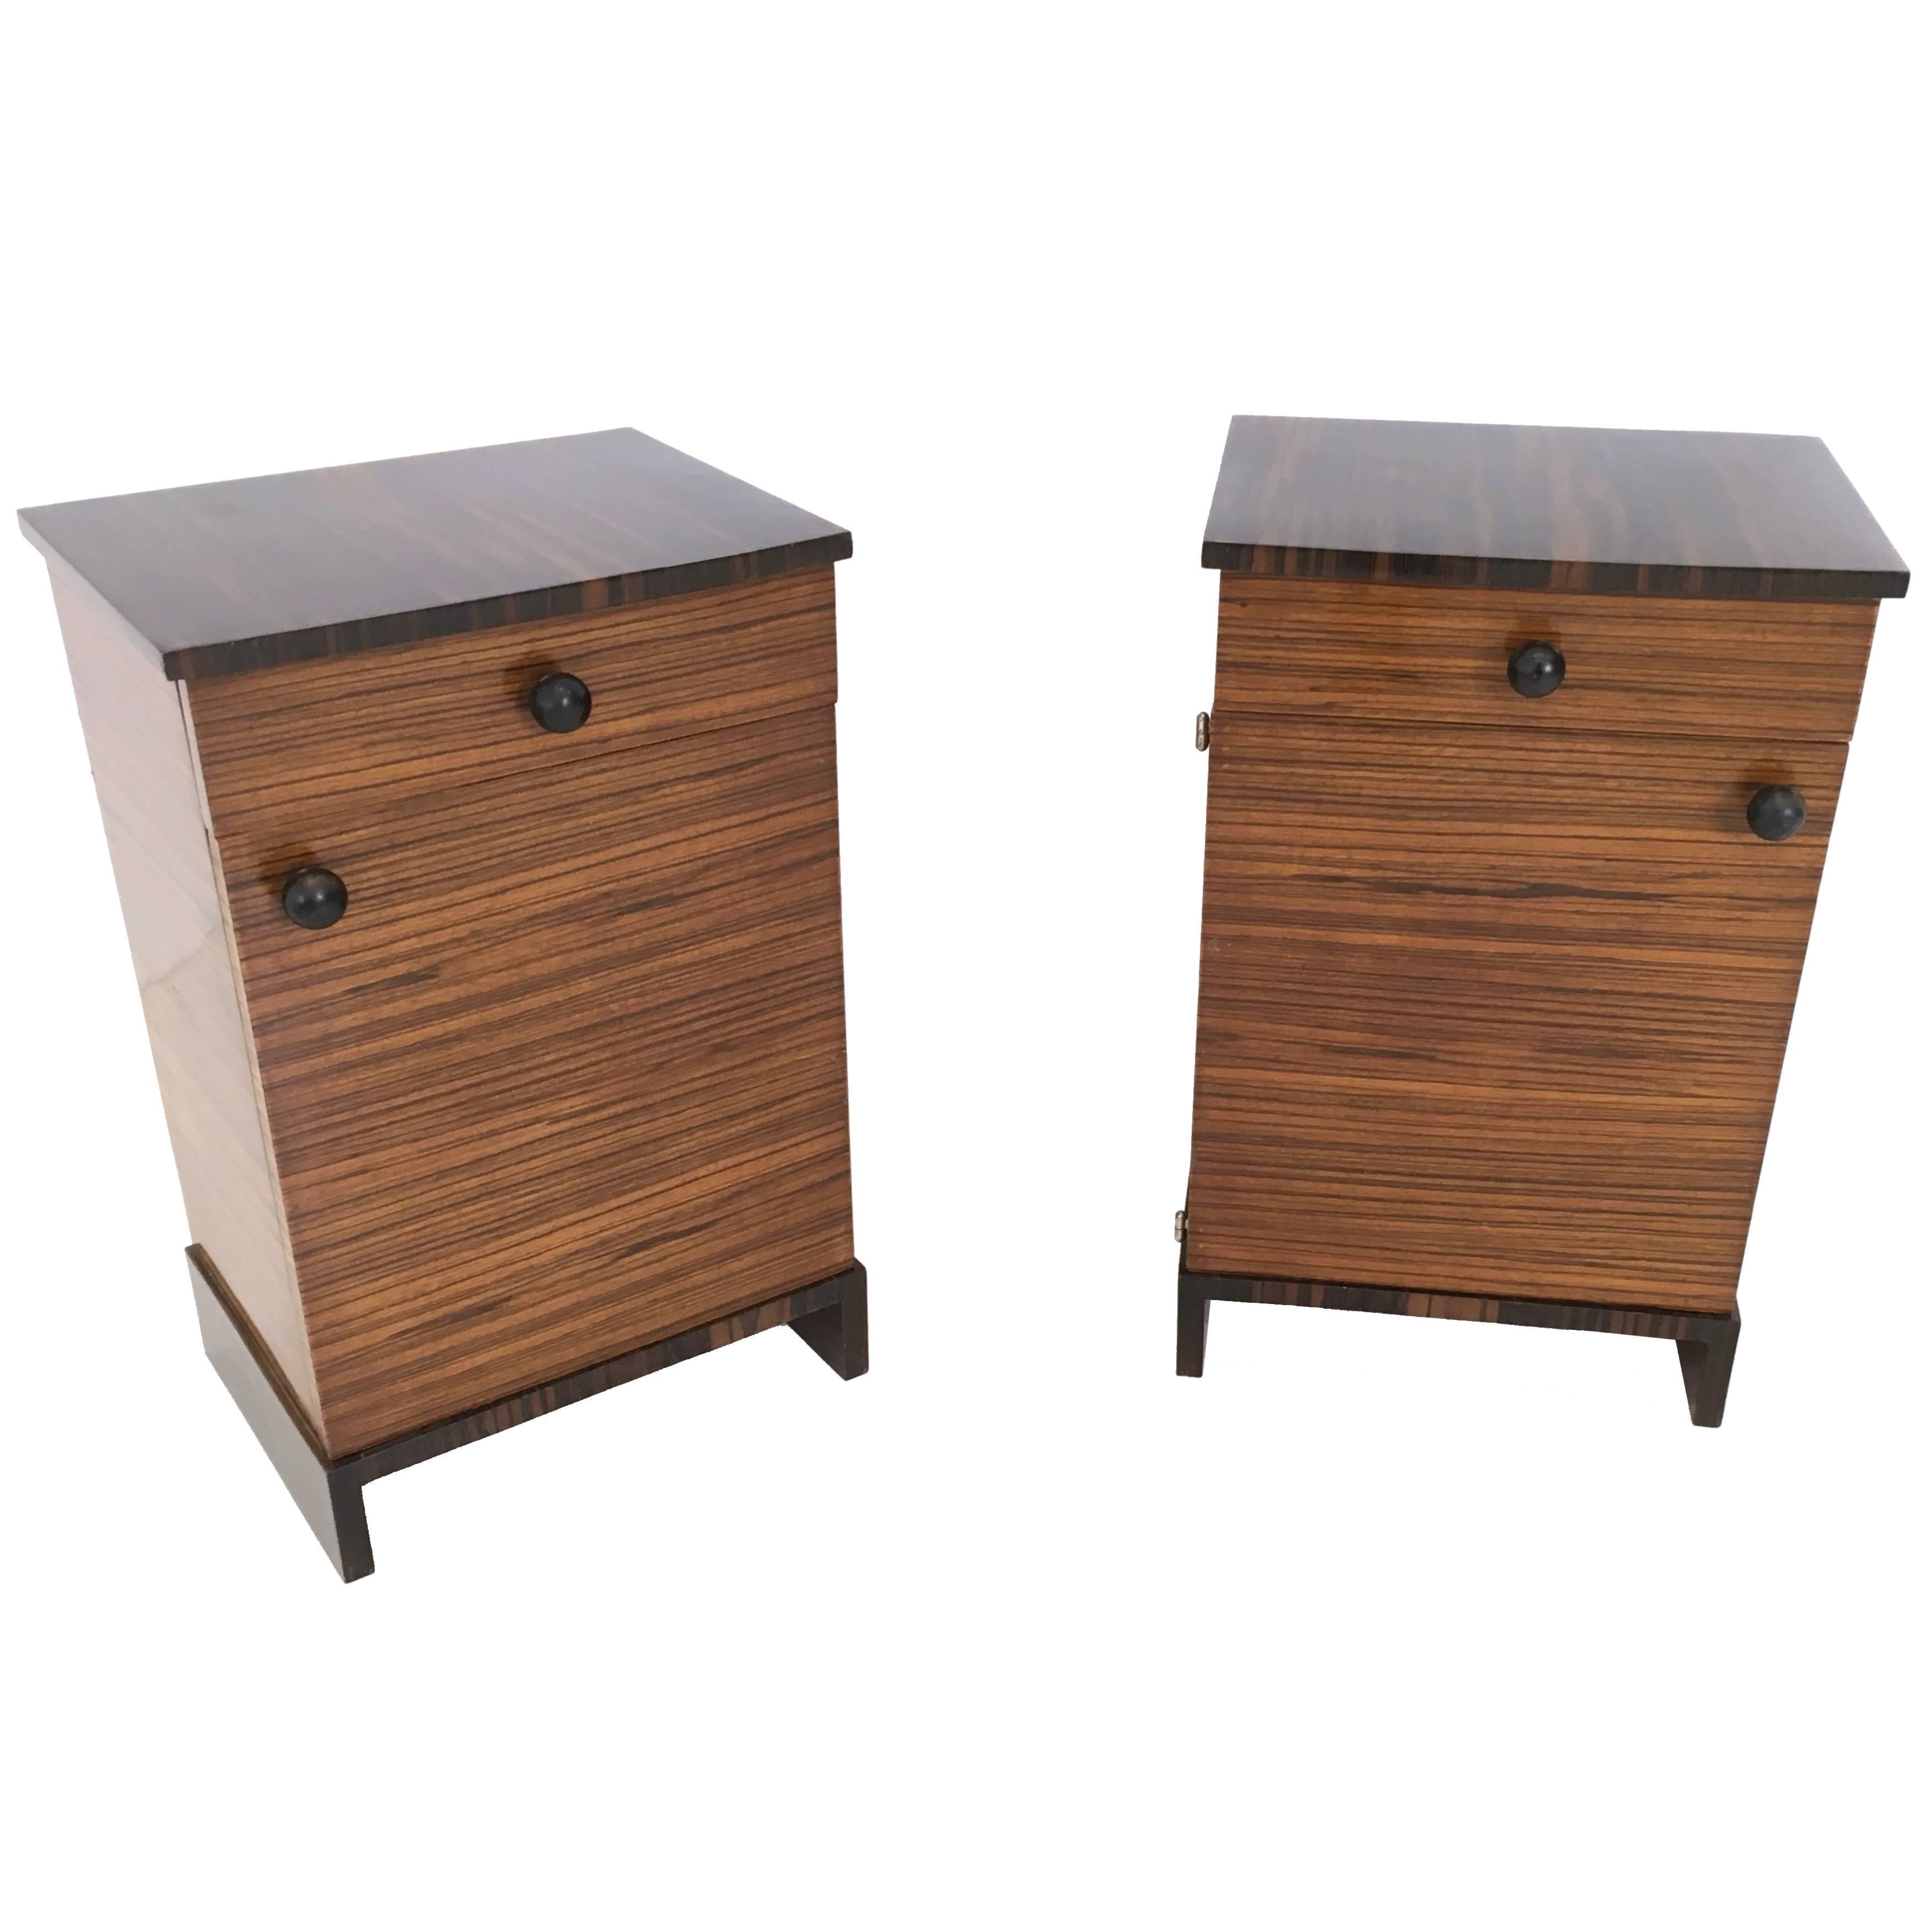 Pair of Art Deco Zebrawood and Macassar Ebony Bedside Tables, Italy, 1940s